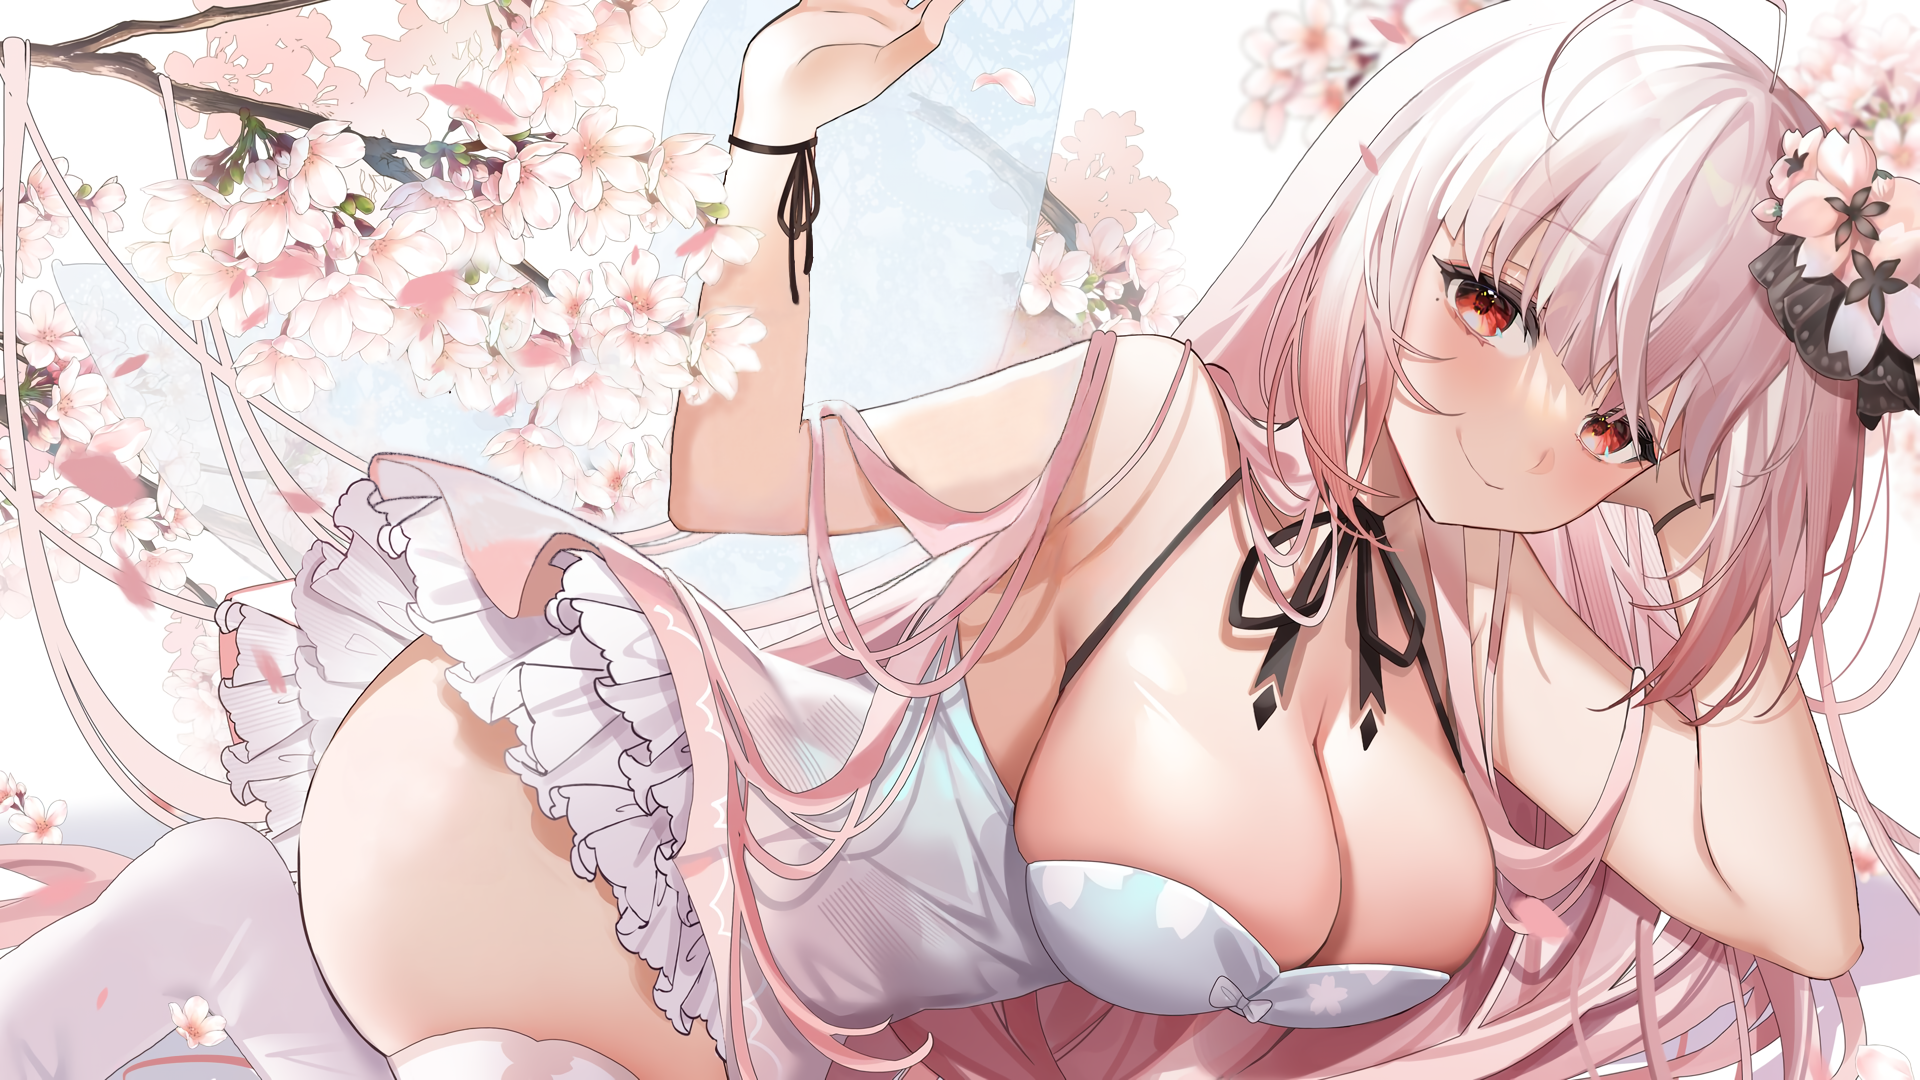 Anime 1920x1080 anime anime girls big boobs ReLive Project Noe (ReLive Project)